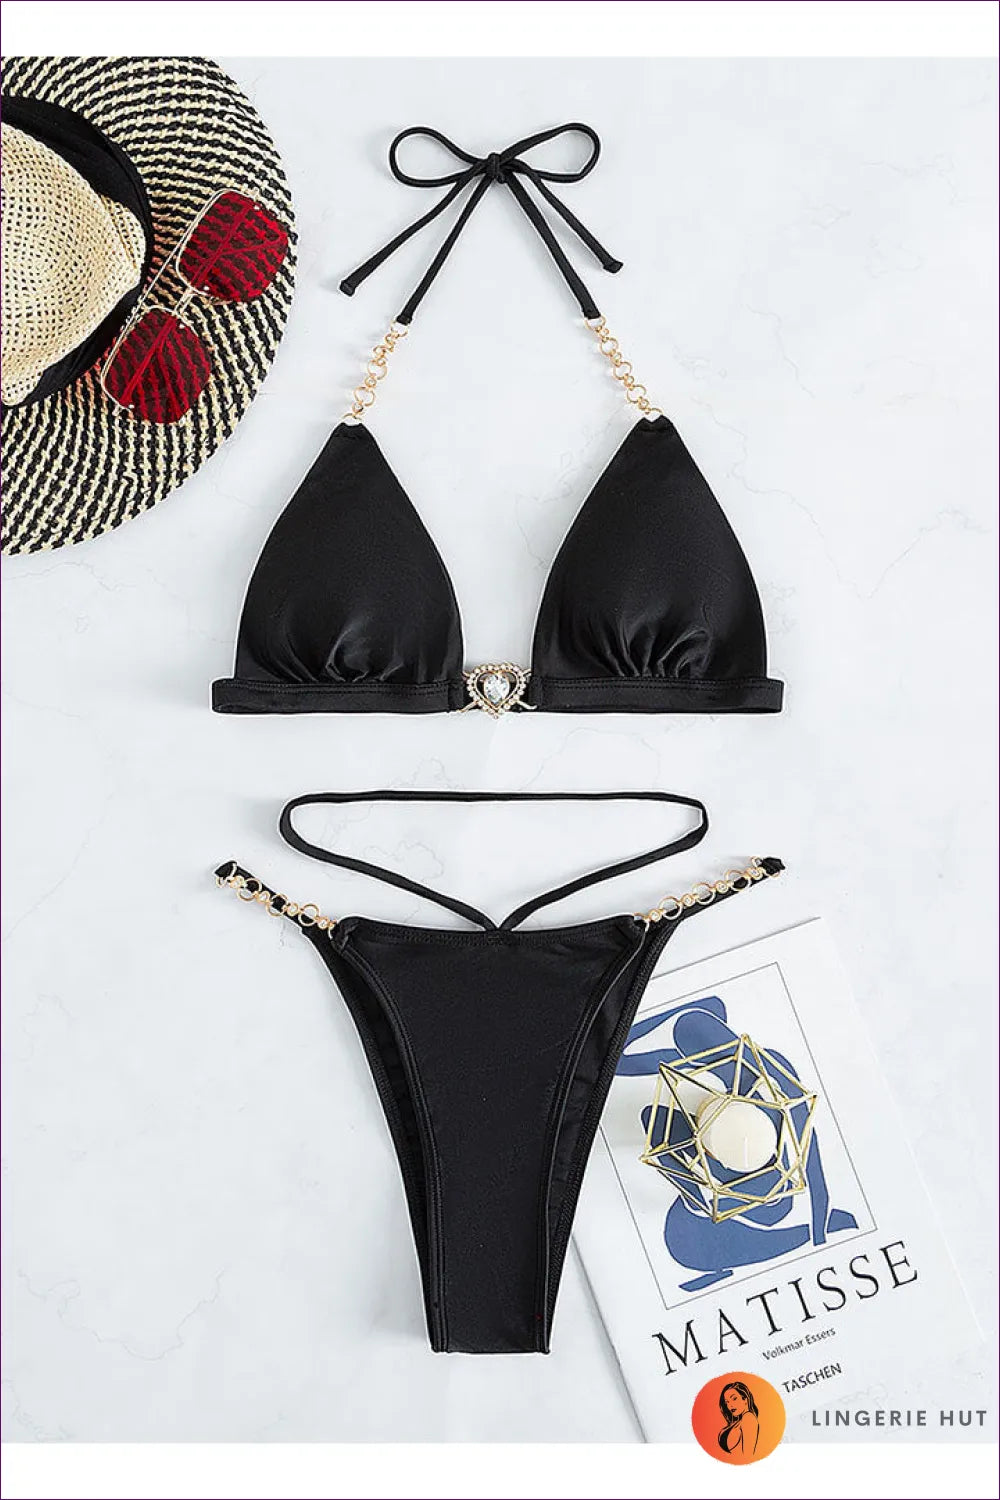 Dive Into Style With Our Sleek And Sexy Chain Triangle Bikini – Perfect For Beach Days Poolside Lounging.